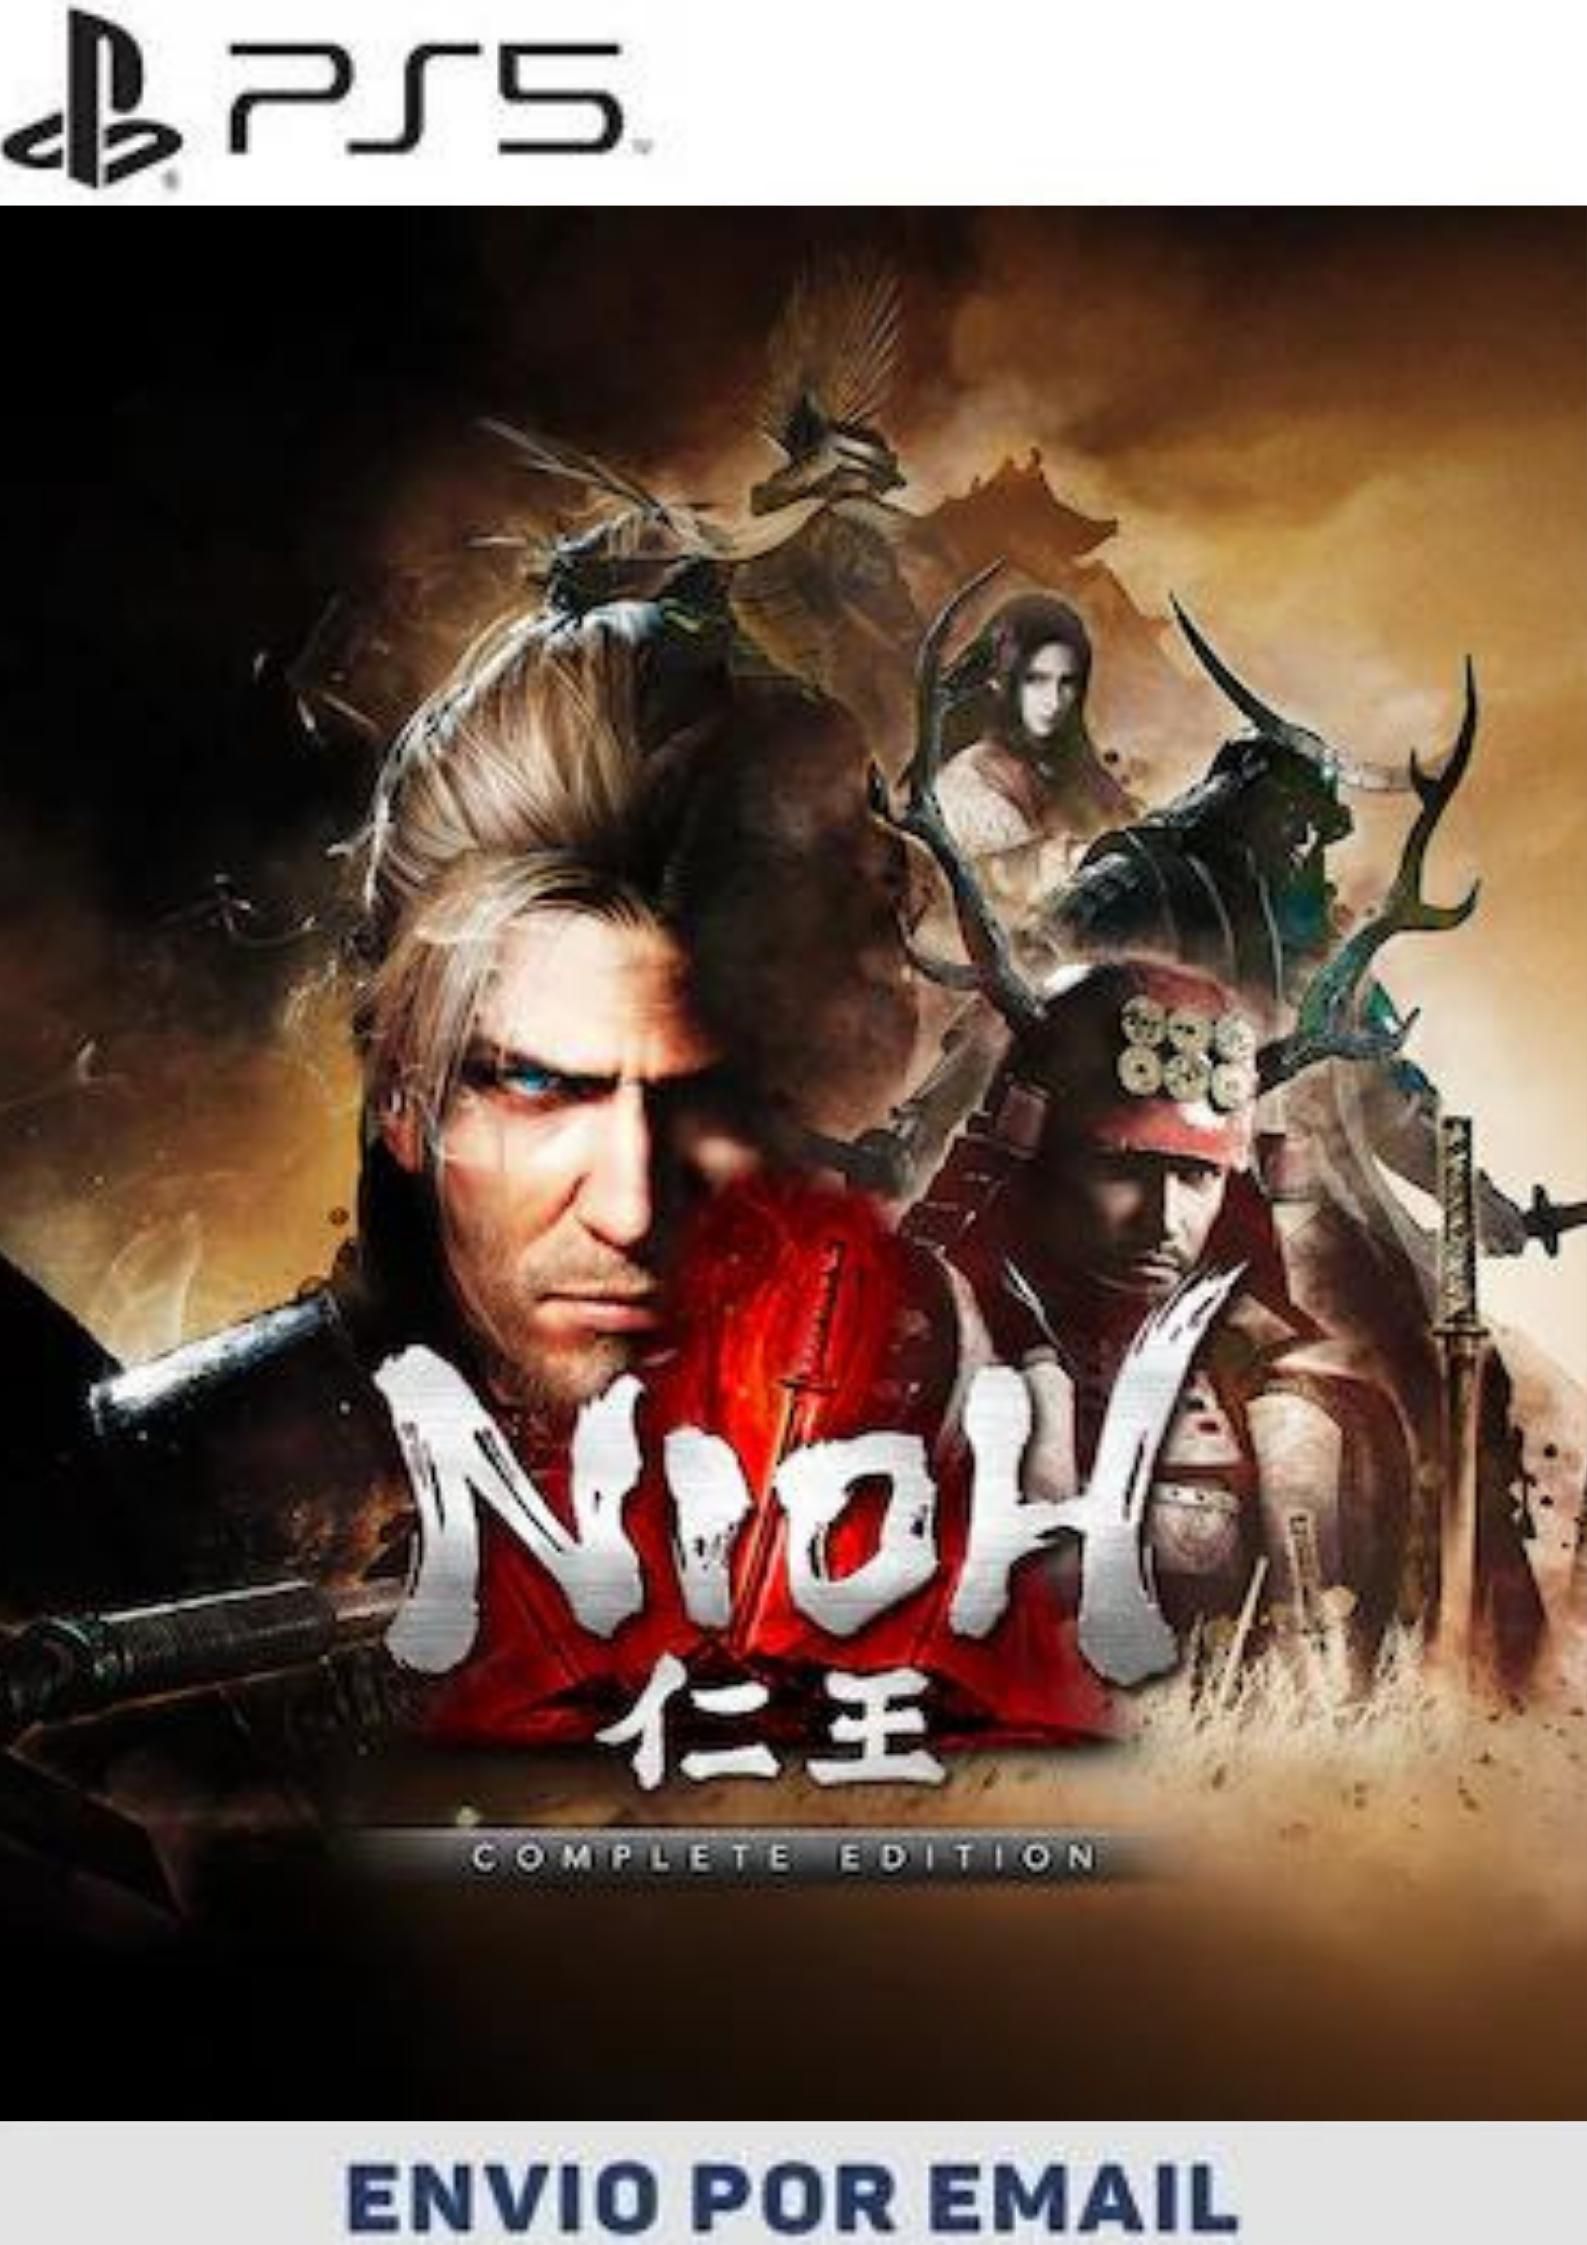 Jogo Nioh Collection Remastered Complete Edition Playstation 5 Midia Fisica  - Azul - Loja Oi Place